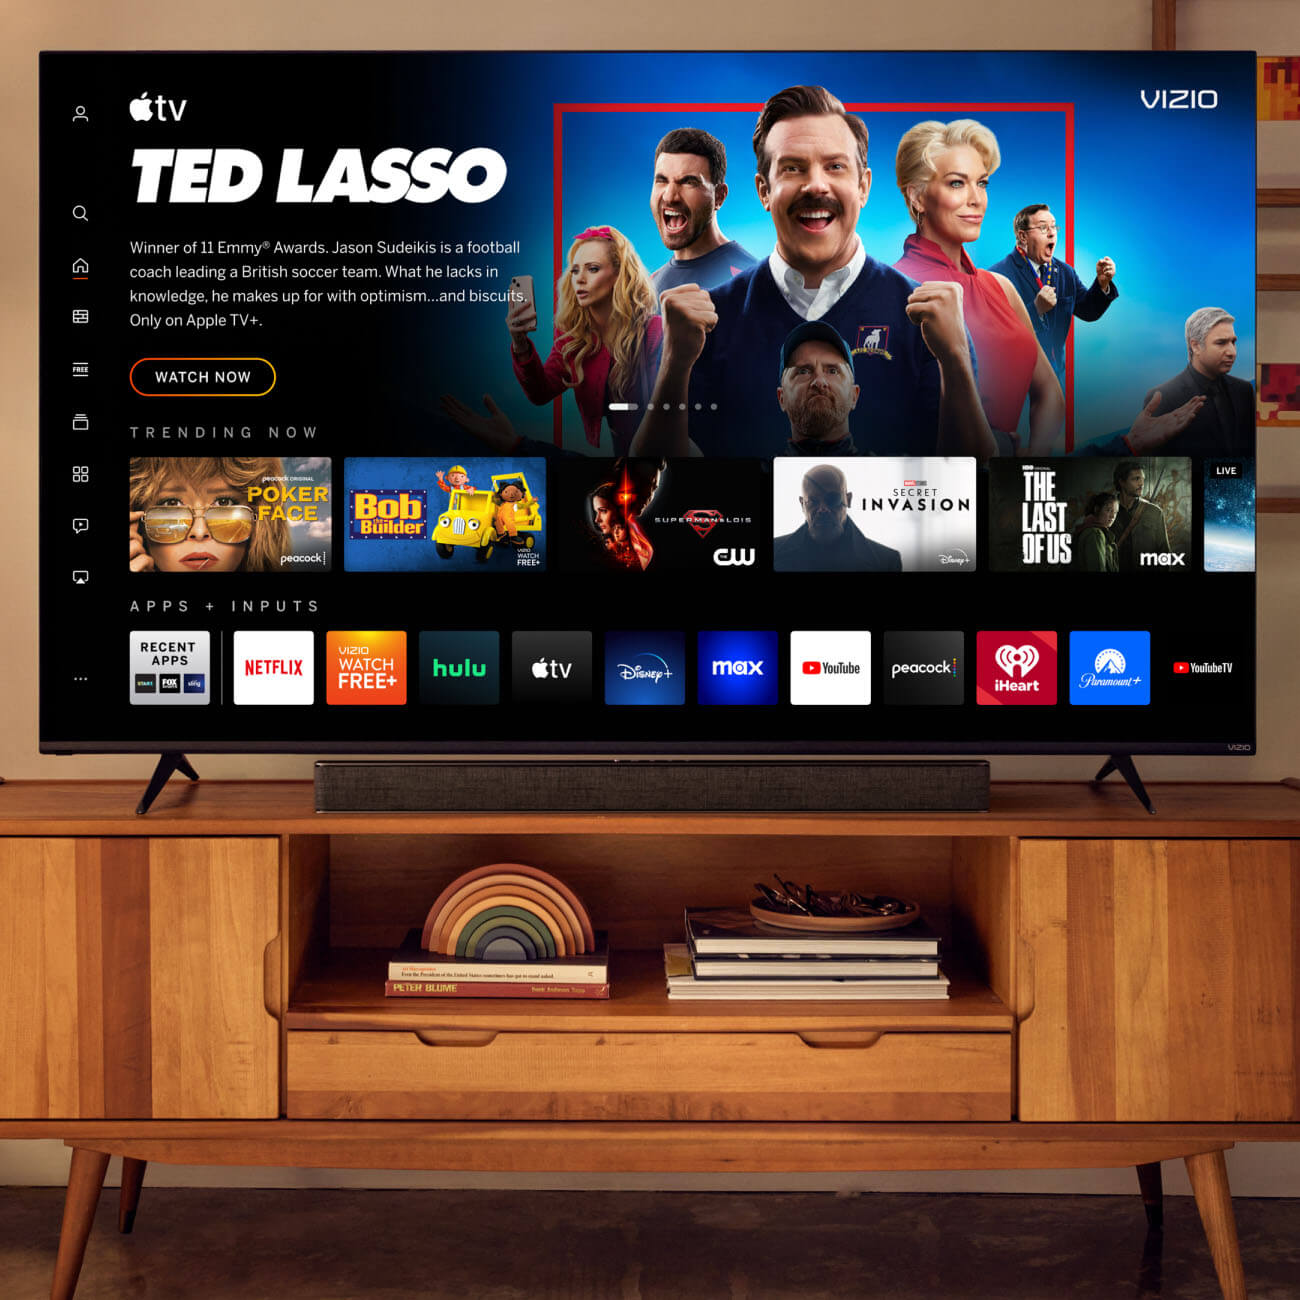 The incredibly smart platform that powers every VIZIO TV.